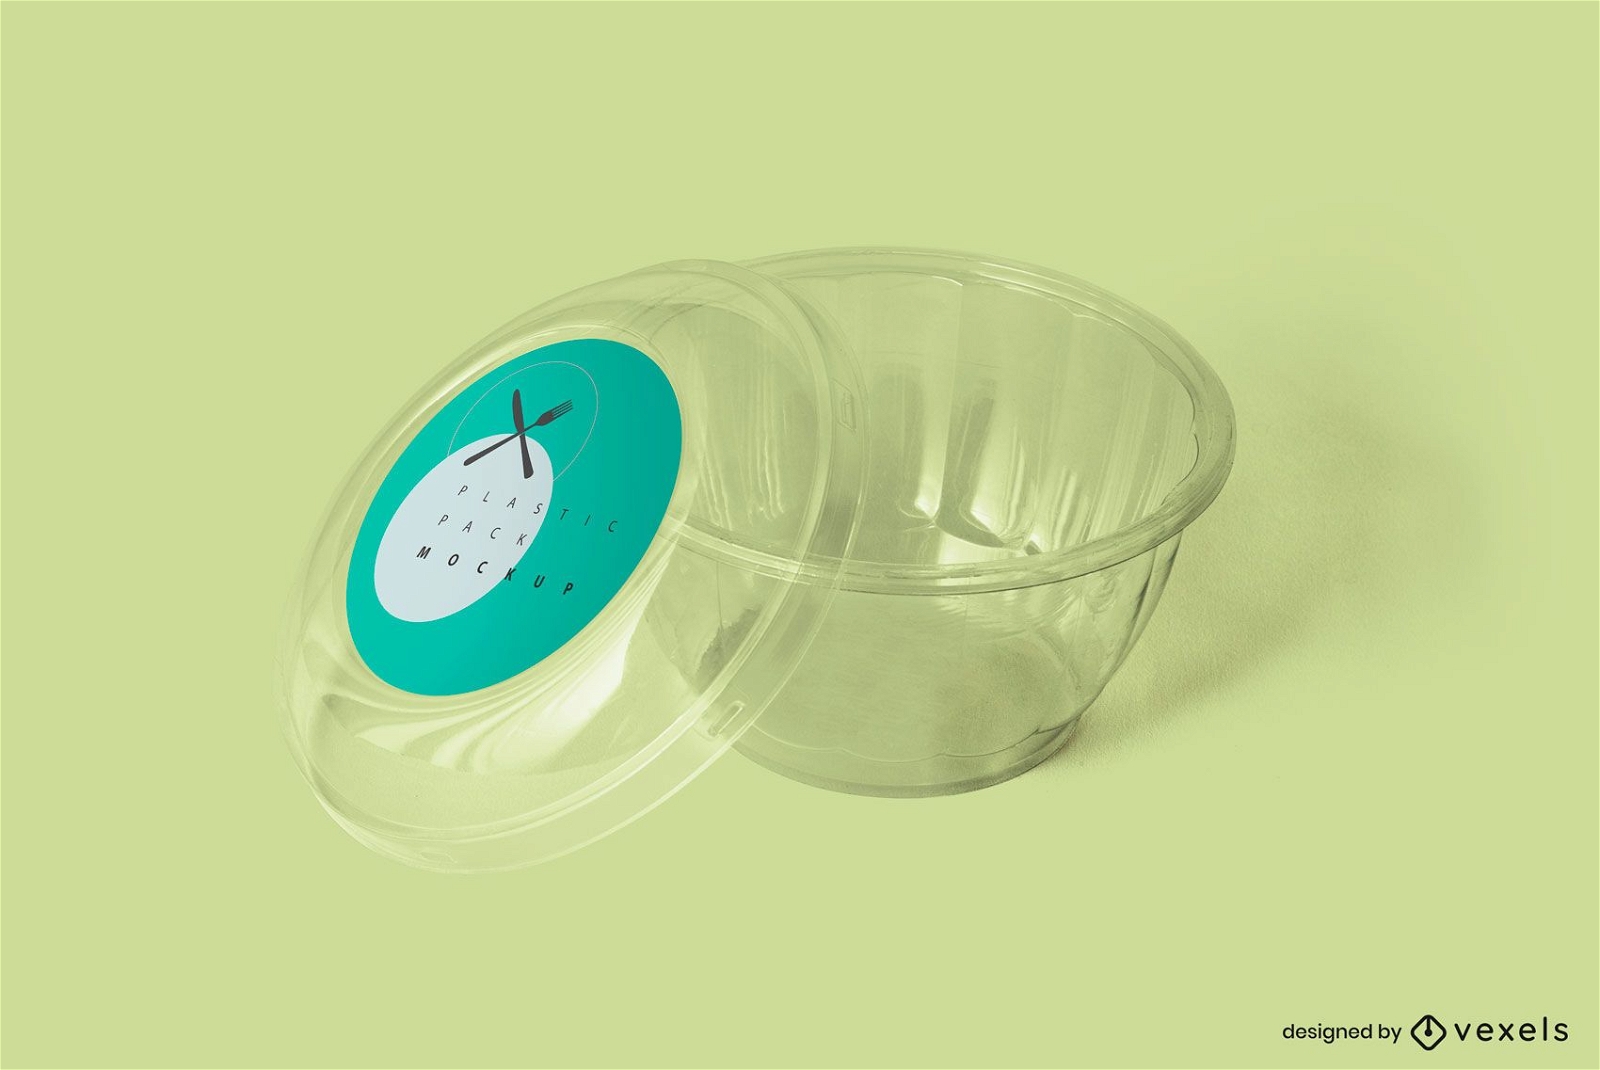 Clear container mockup design